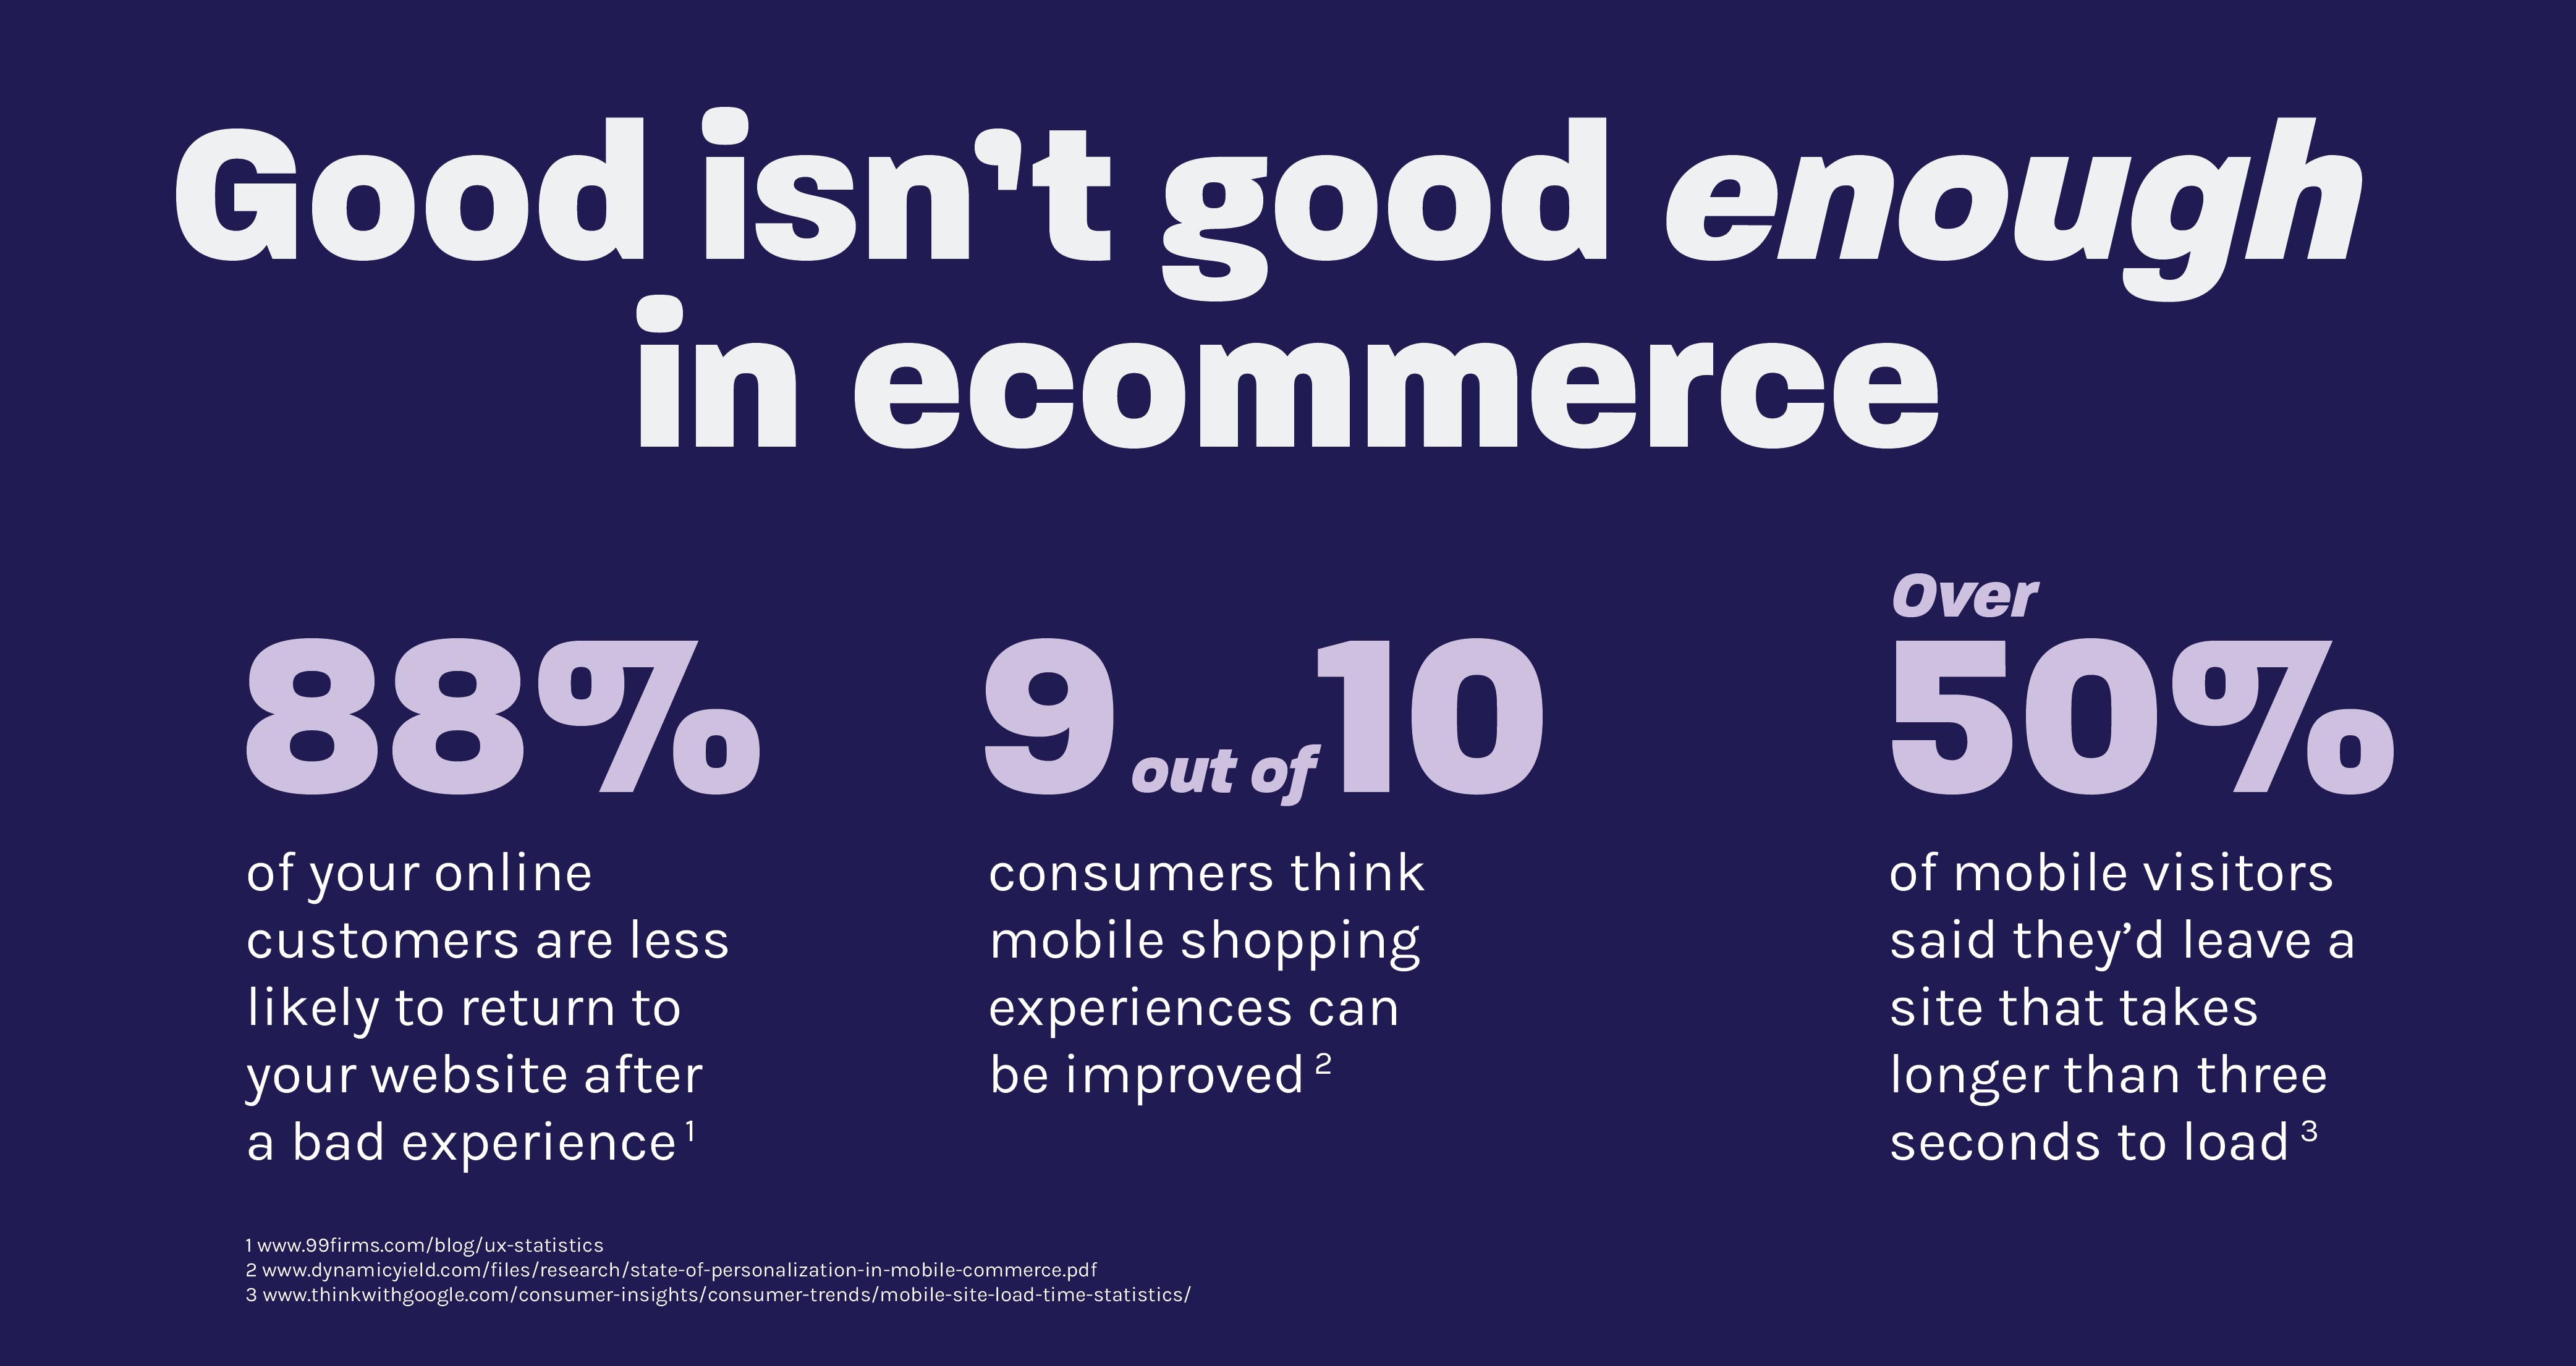 good isn't good enough in ecommerce. 88% of your online customers are less likely to return to your website after a bad experience. 9 out of 10 consumers think mobile shopping experiences can be improved. over 50% of mobile visitors said they'd leave a site that takes longer than three seconds to load